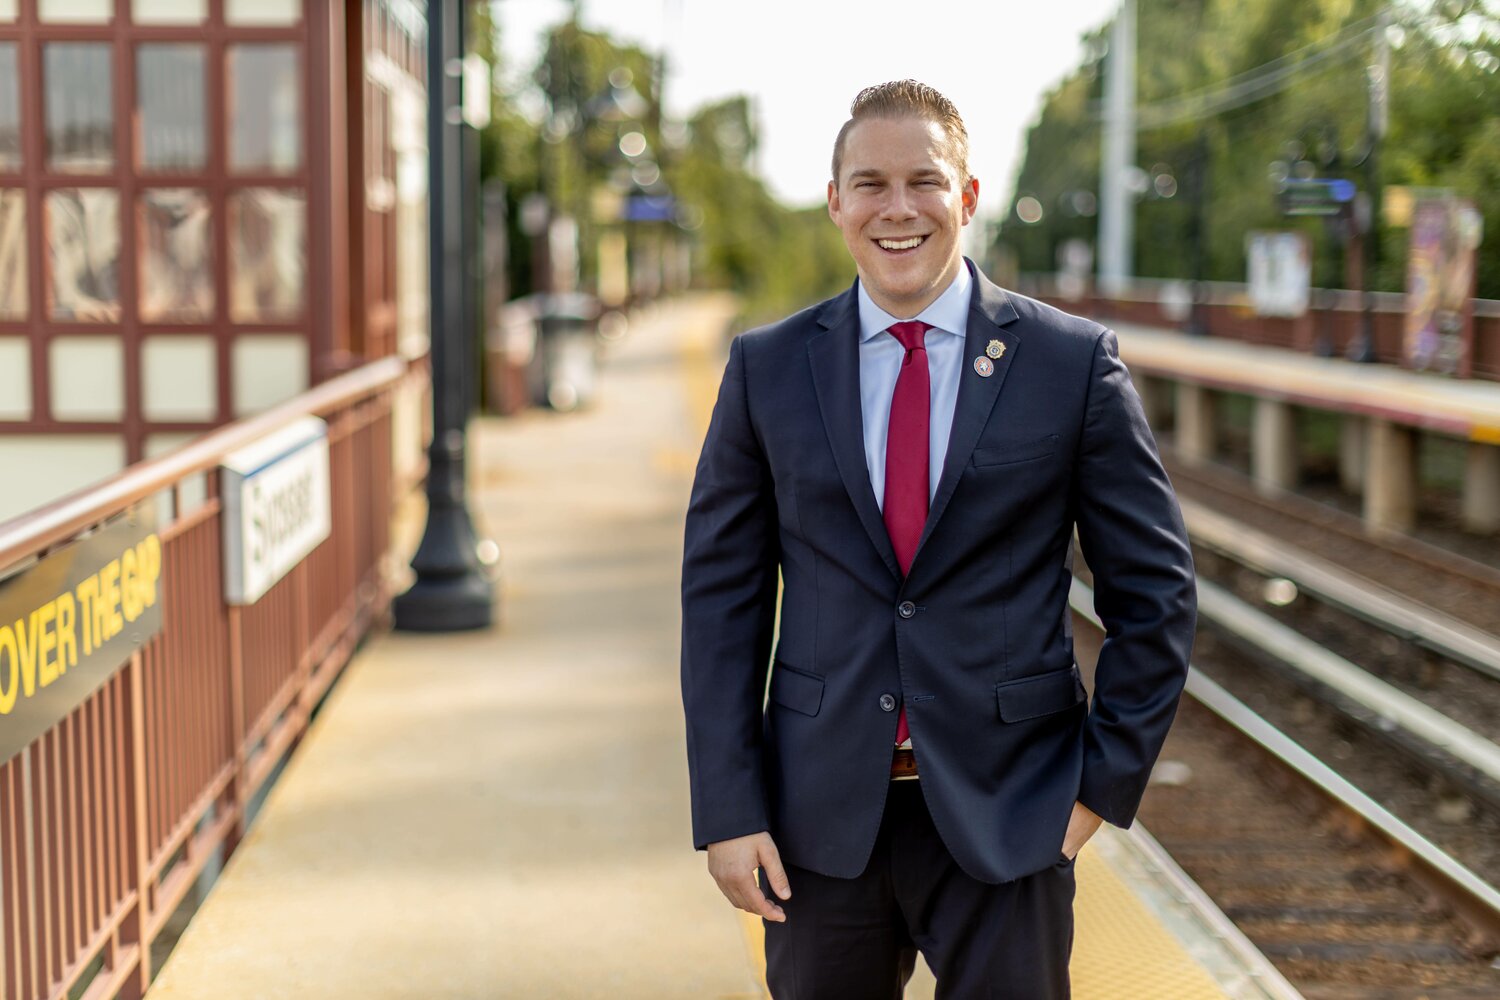 Nassau County Legislator Josh Lafazan is running for his third term in Mineola, and he’s not even 30. While he has focused a lot on U.S. Rep. George Santos, he also says there’s no one else in the legislature that works has hard as he does serving constituents.